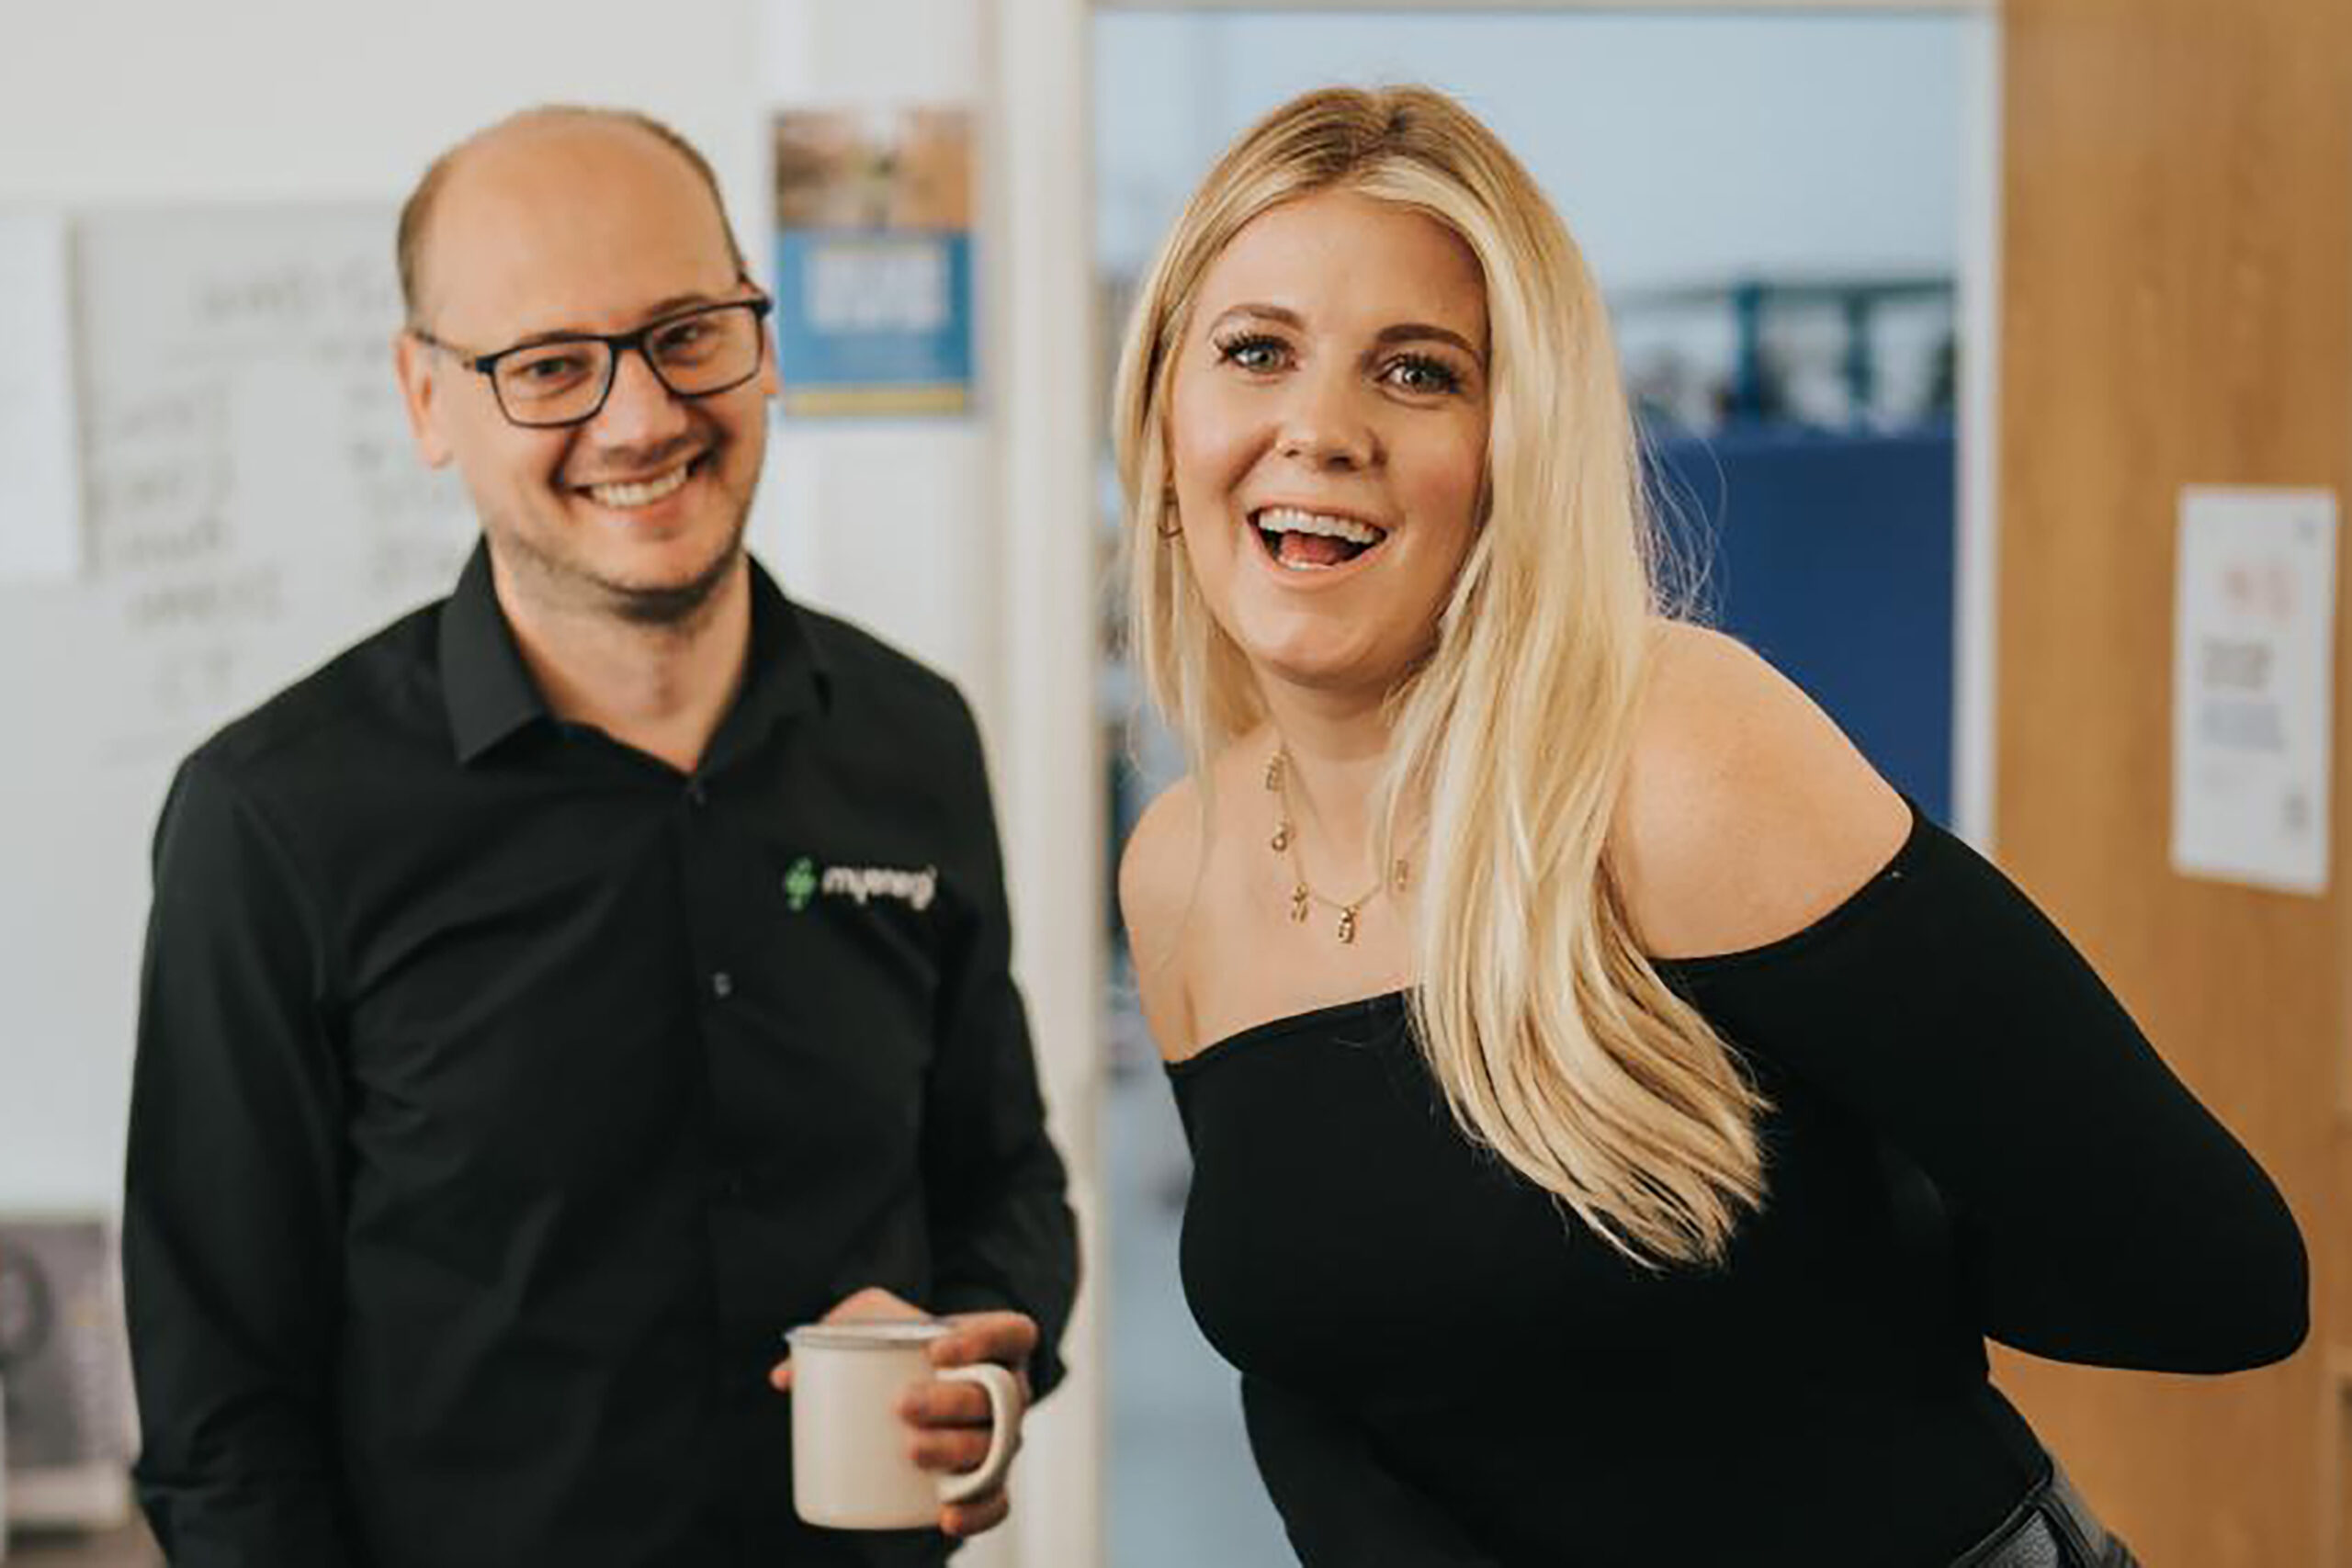 Co-founders of renewable energy tech firm, myenergi, Lee Sutton and Jordan Brompton at the myenergi offices in 2017.